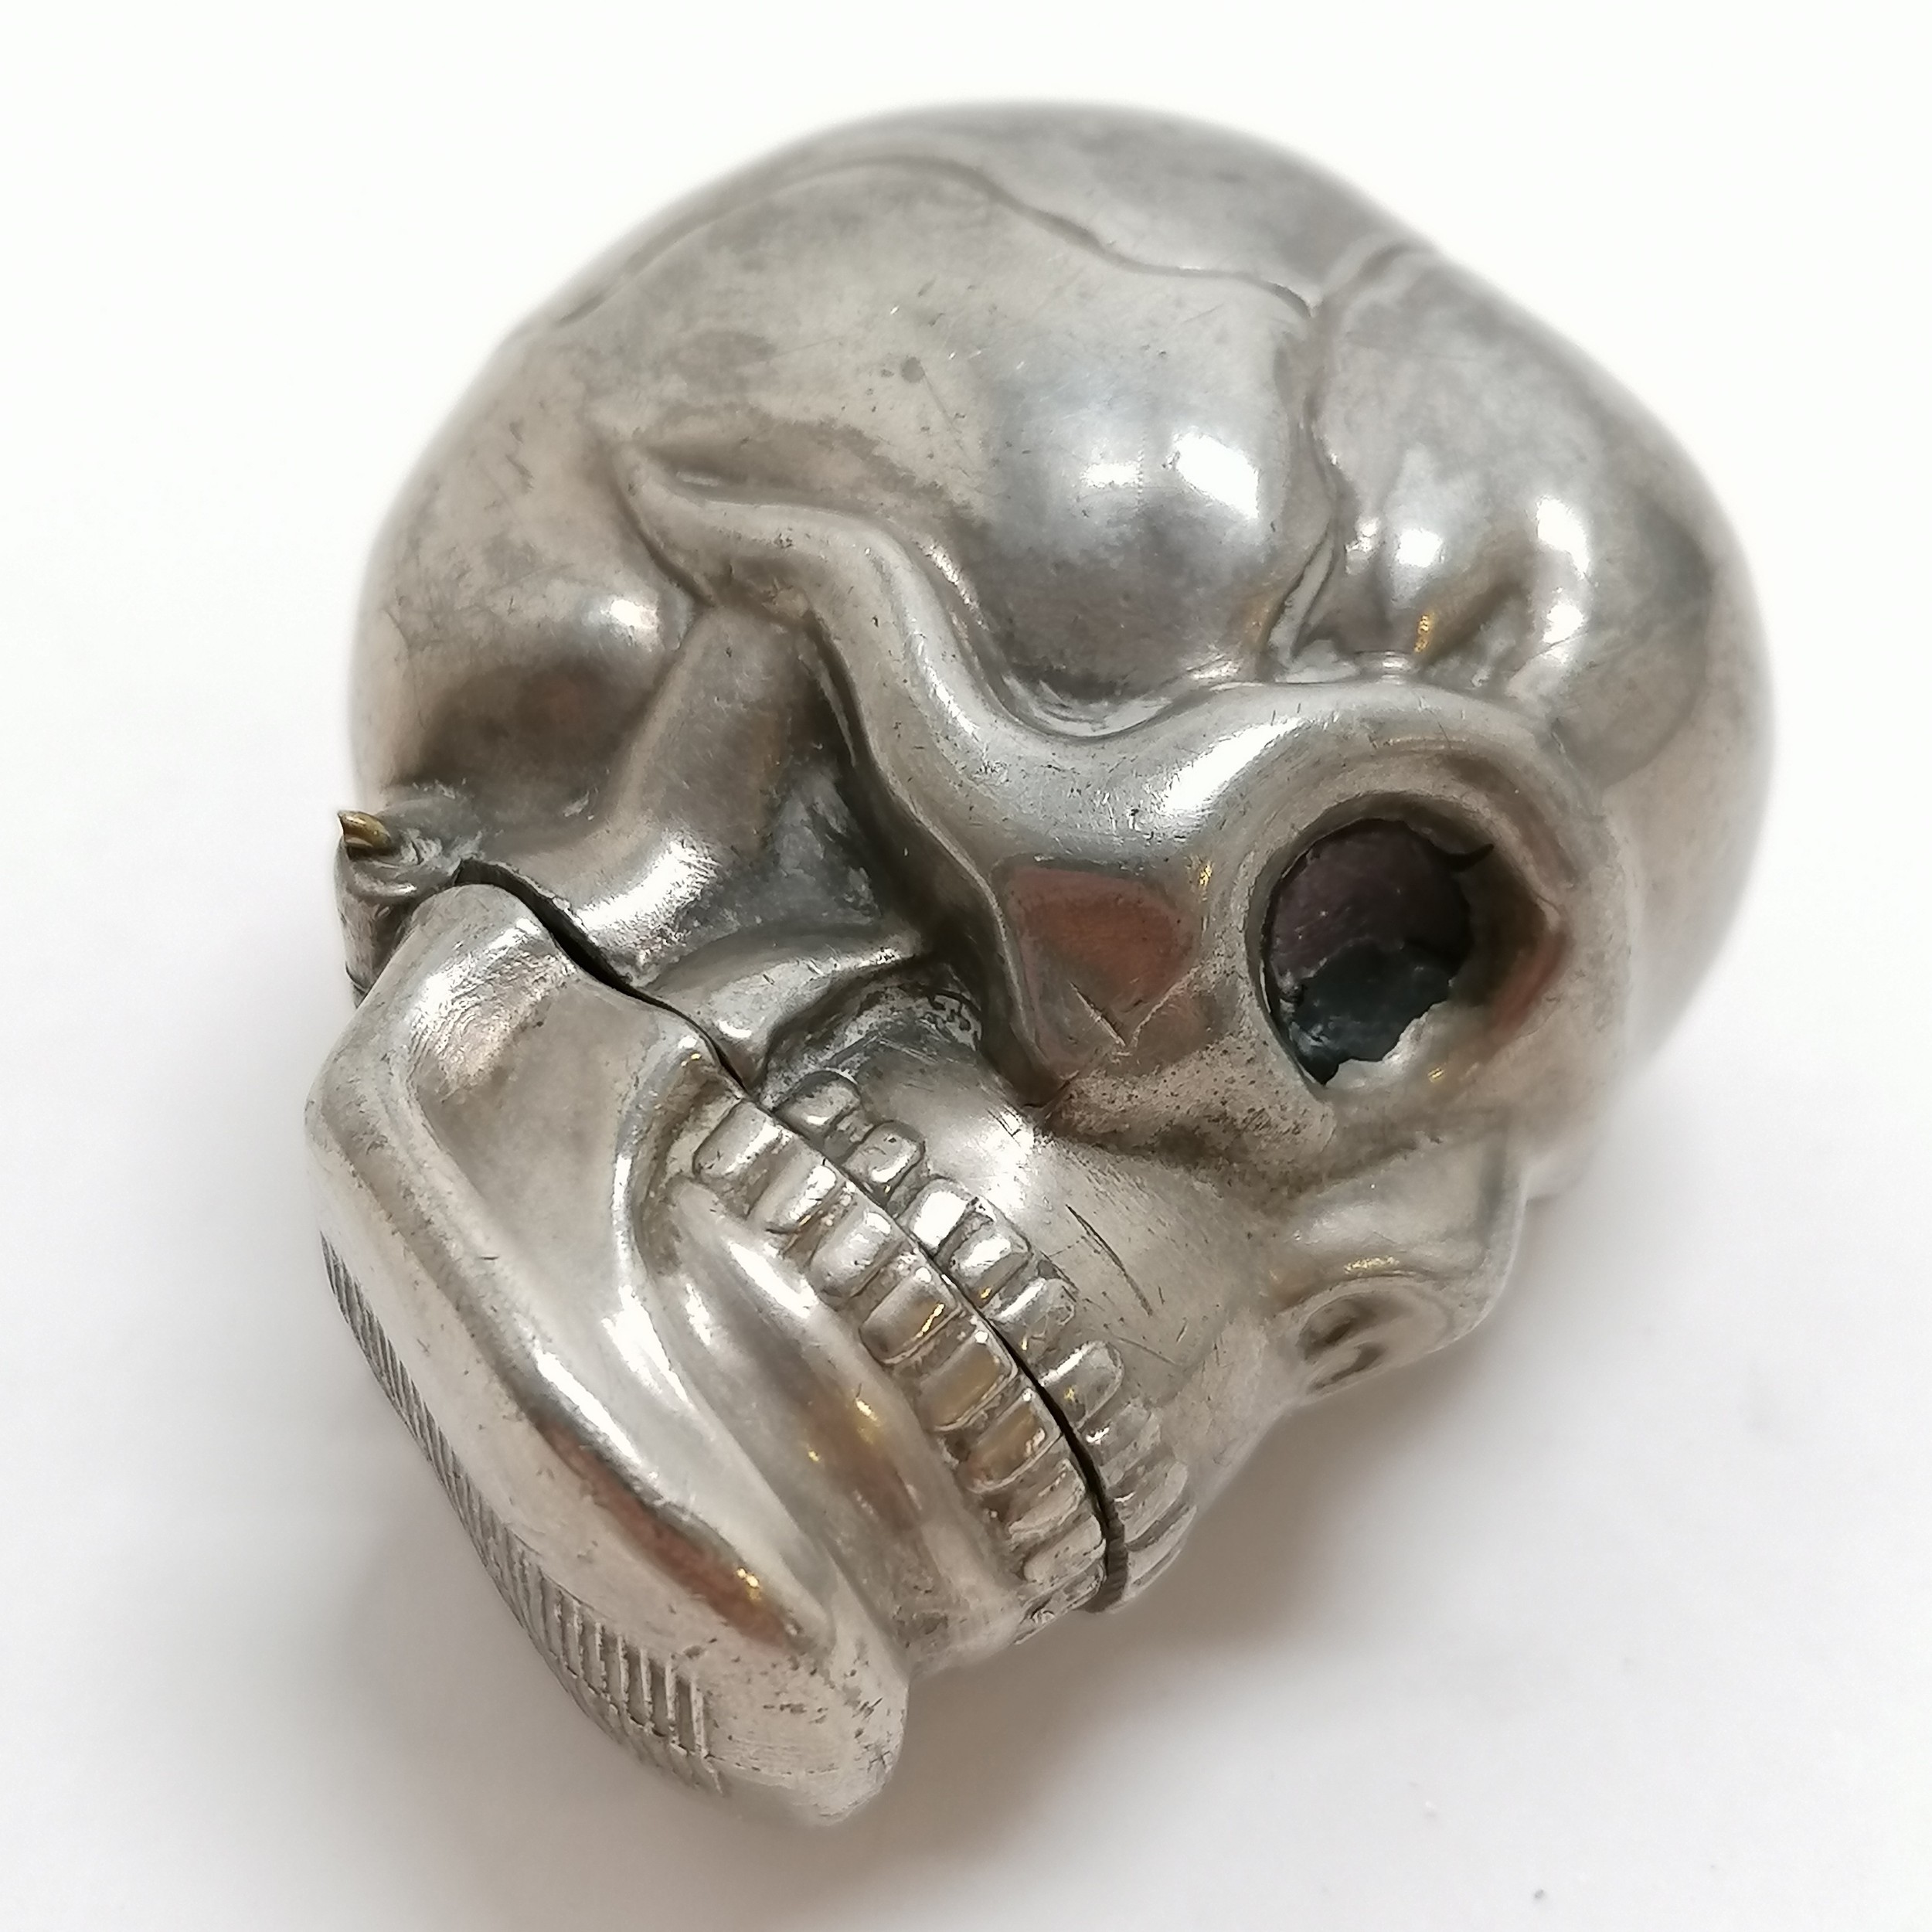 Novelty white metal vesta/match safe skull 5cm high Condition reportIn good used condition. Eye